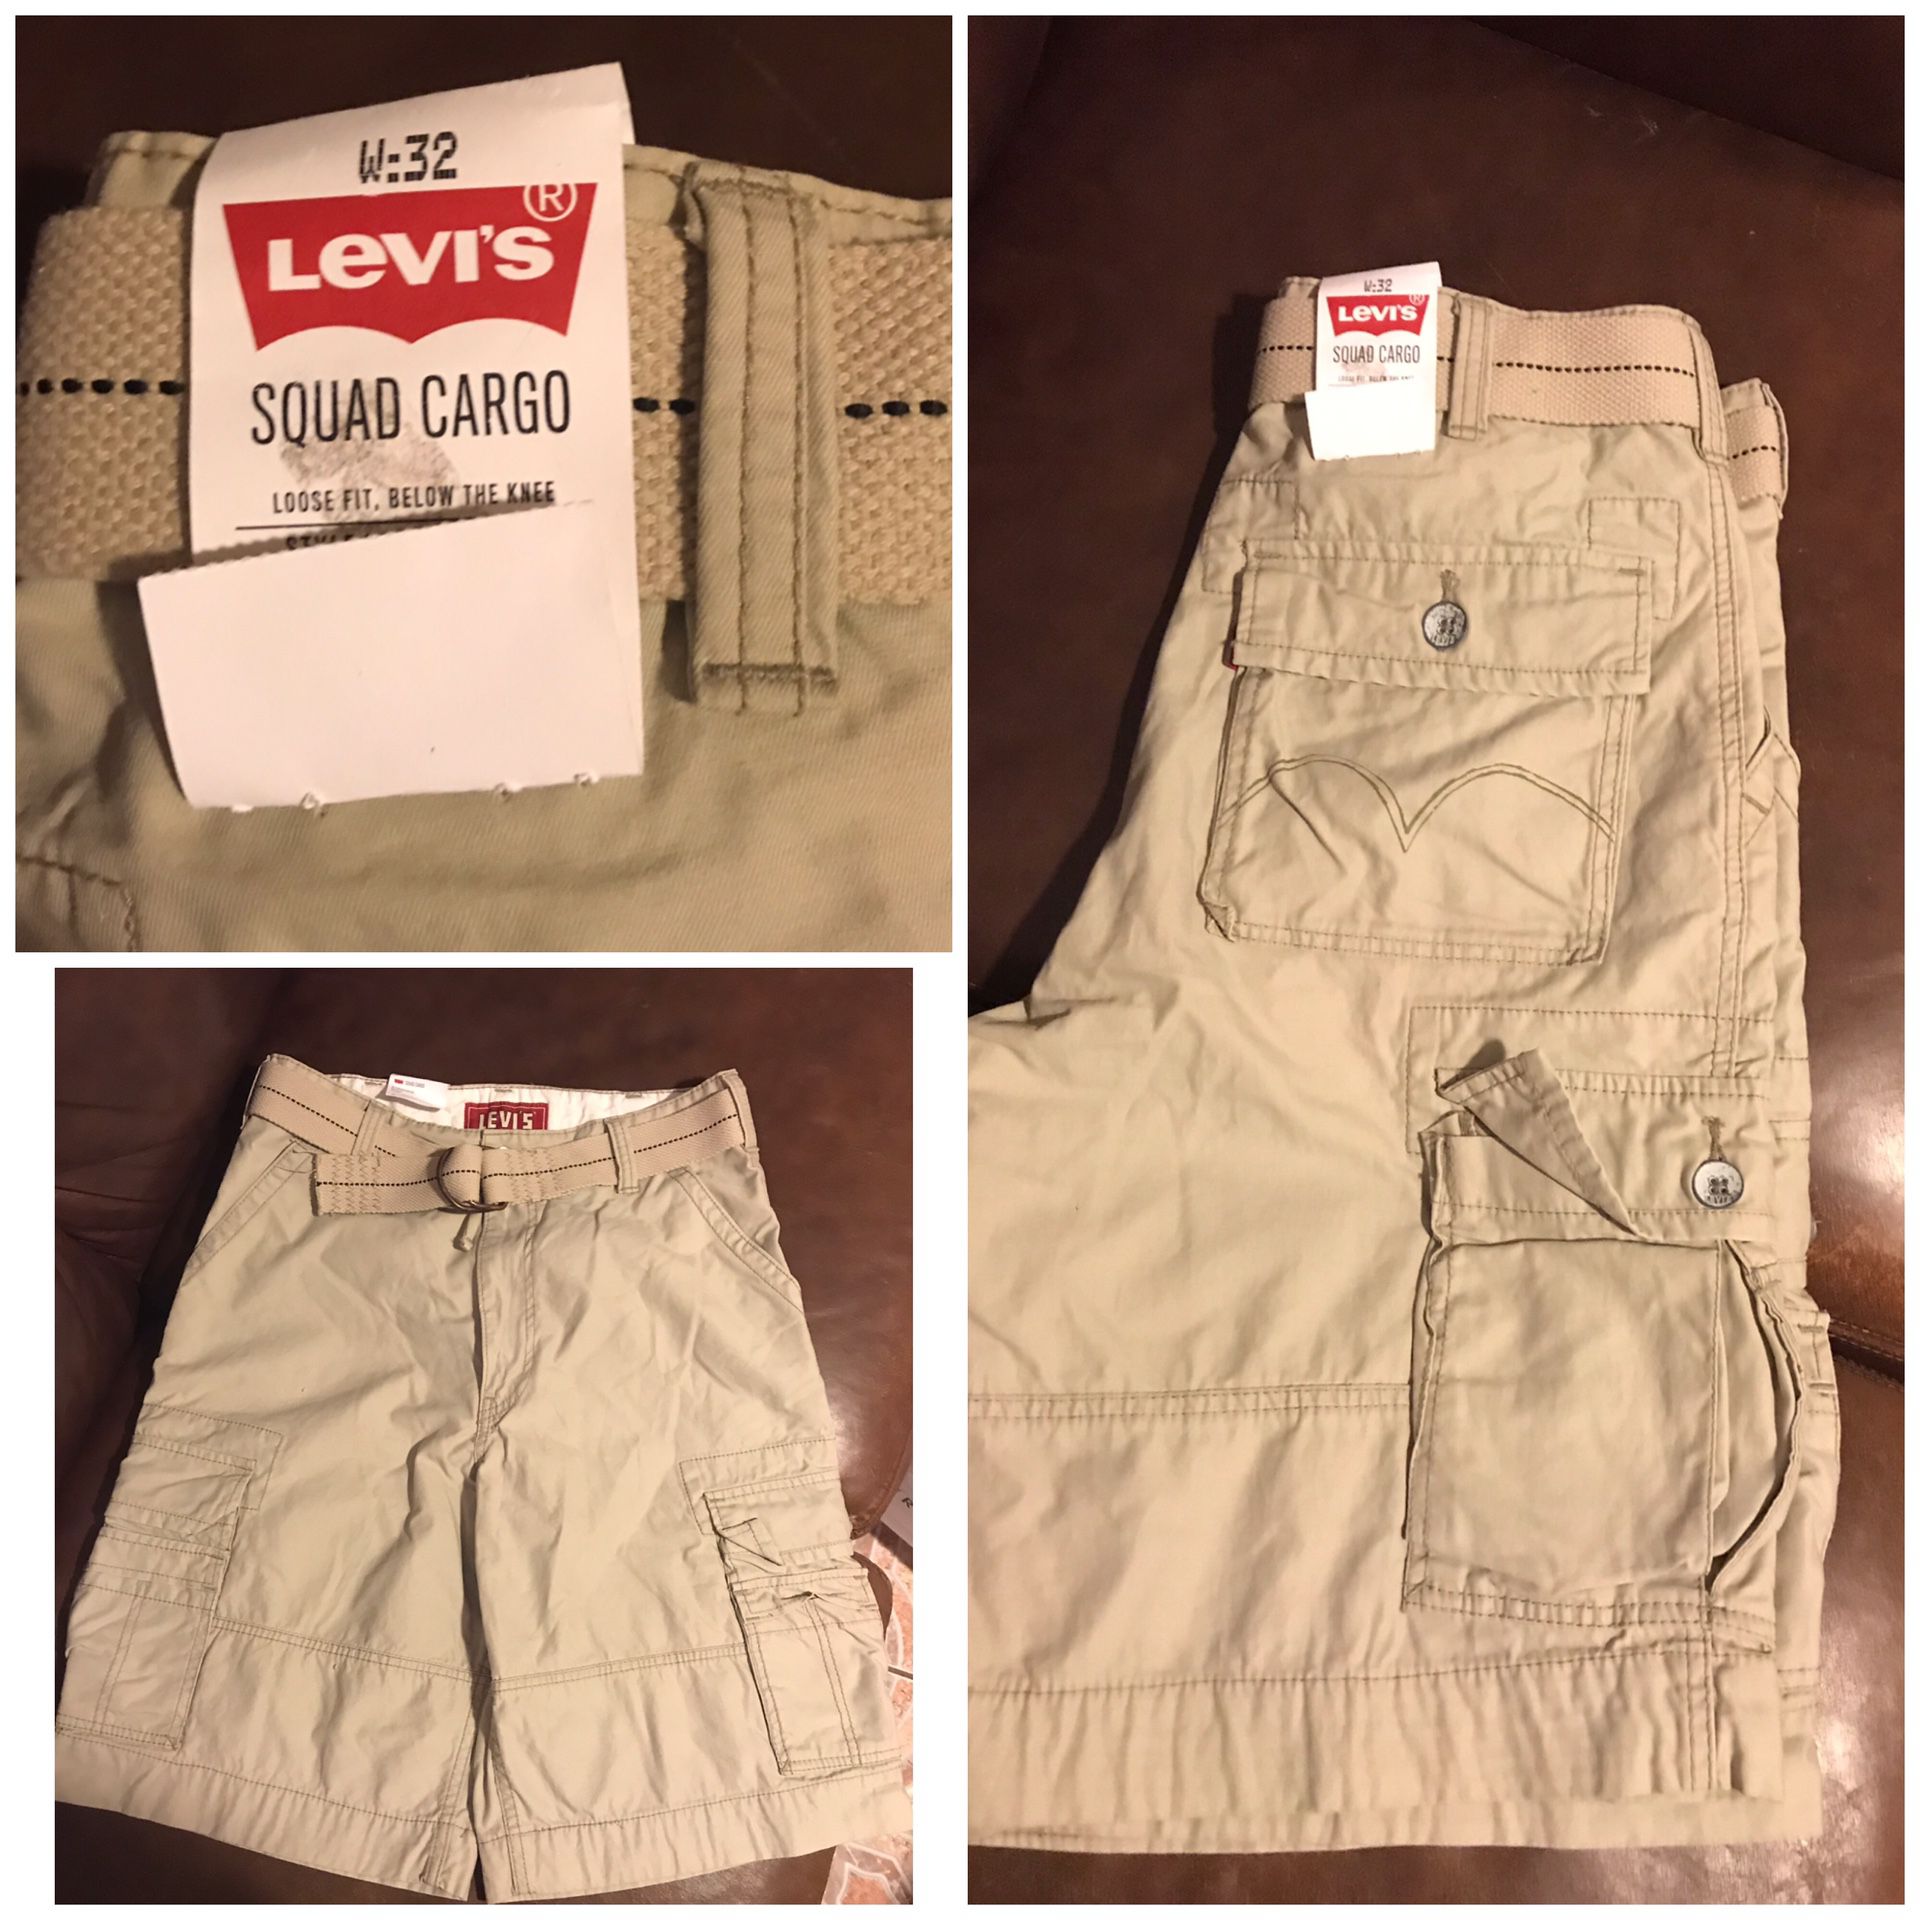 New With Tags Men’s Levi’s Squad Cargo Belted Shorts Size 32 Loose Fit Below the Knee